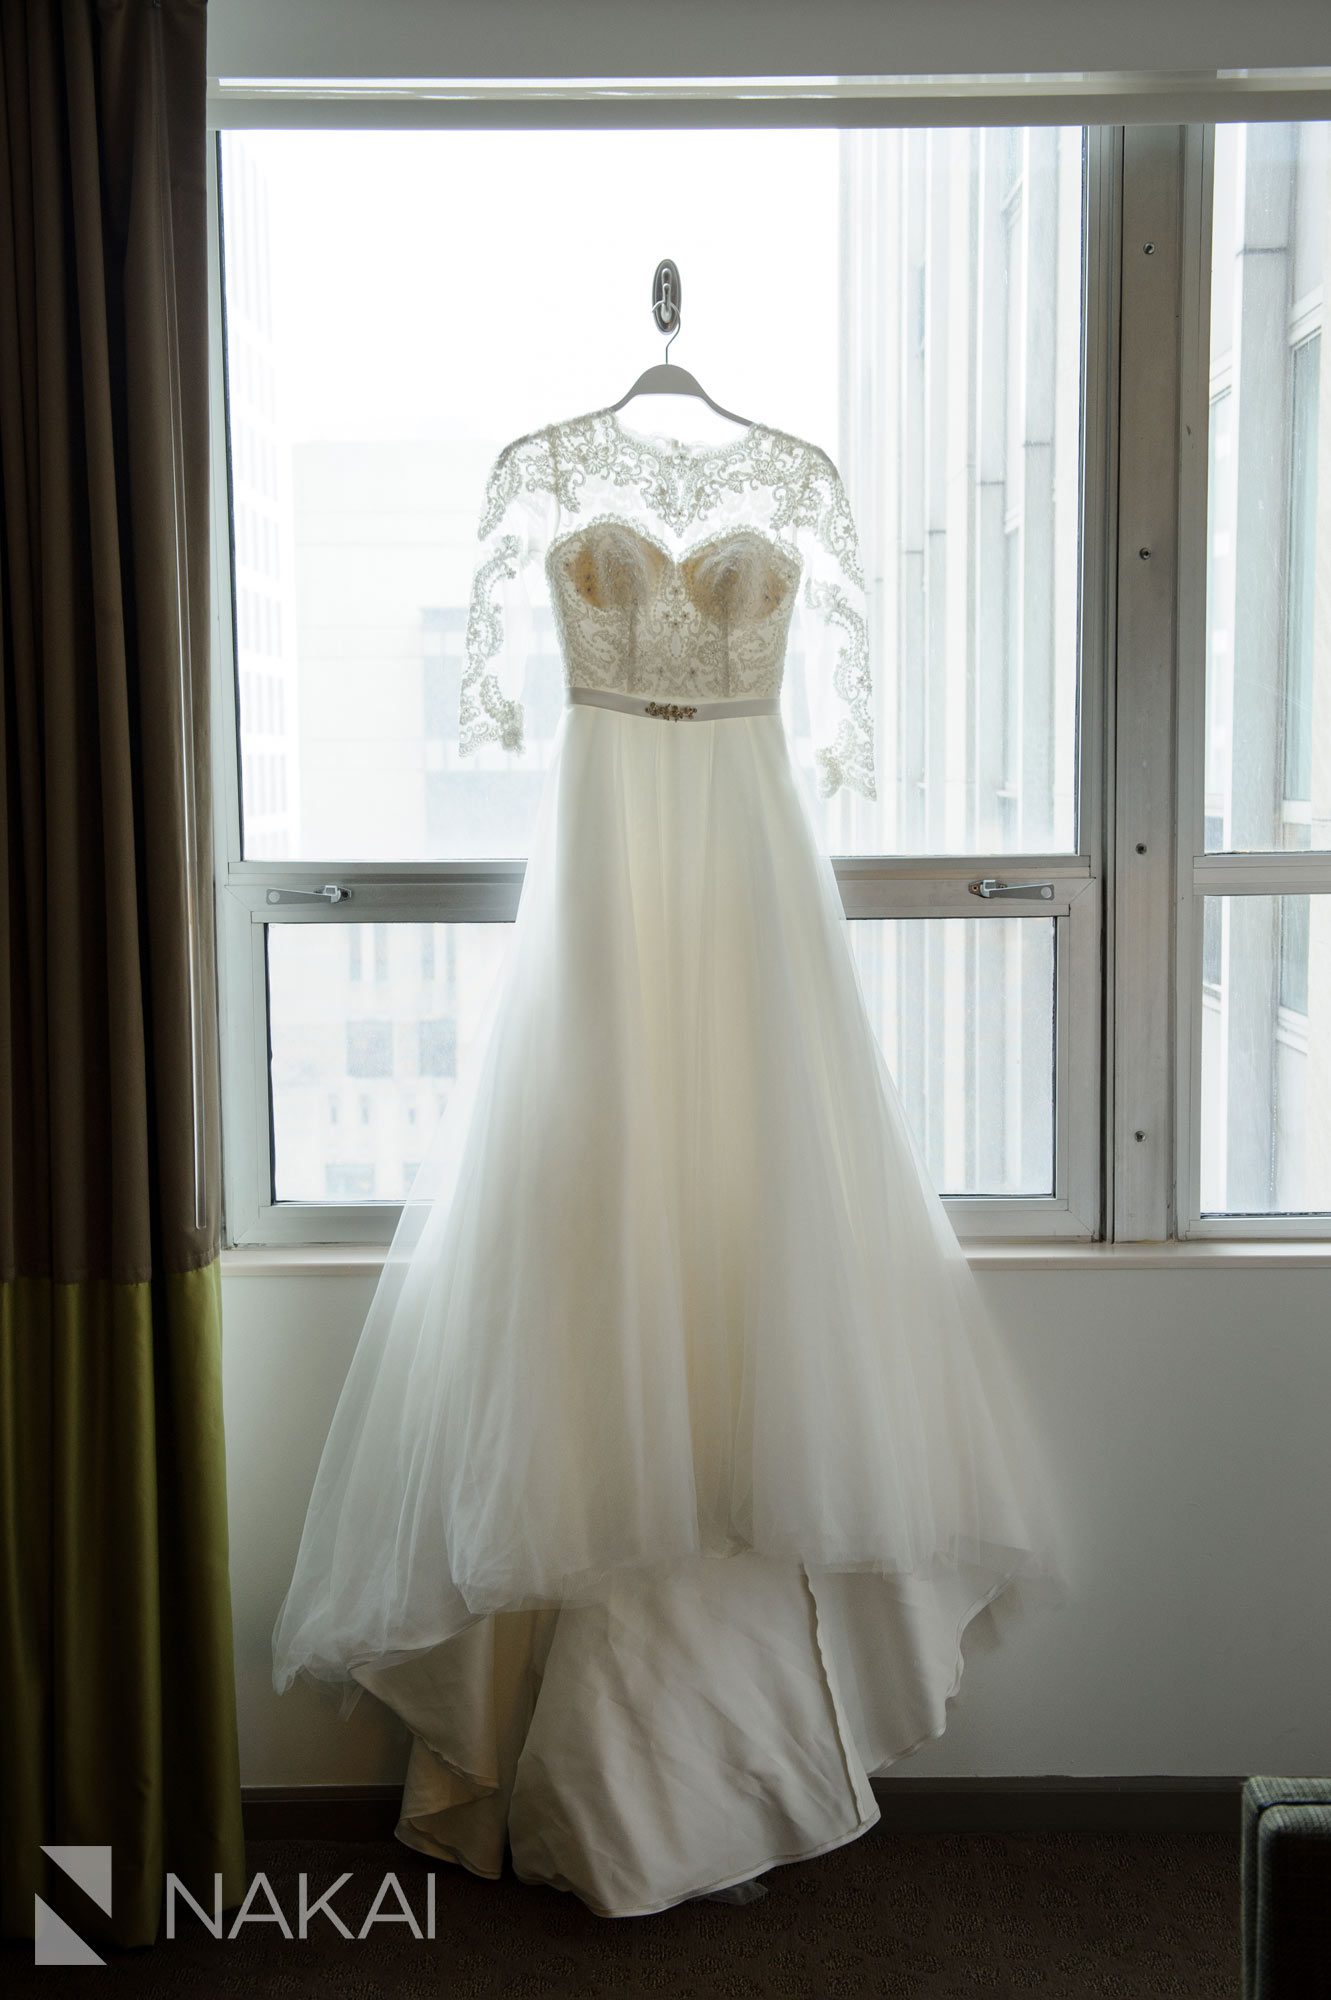 dress intercontinental magnificent mile wedding photo chicago getting ready